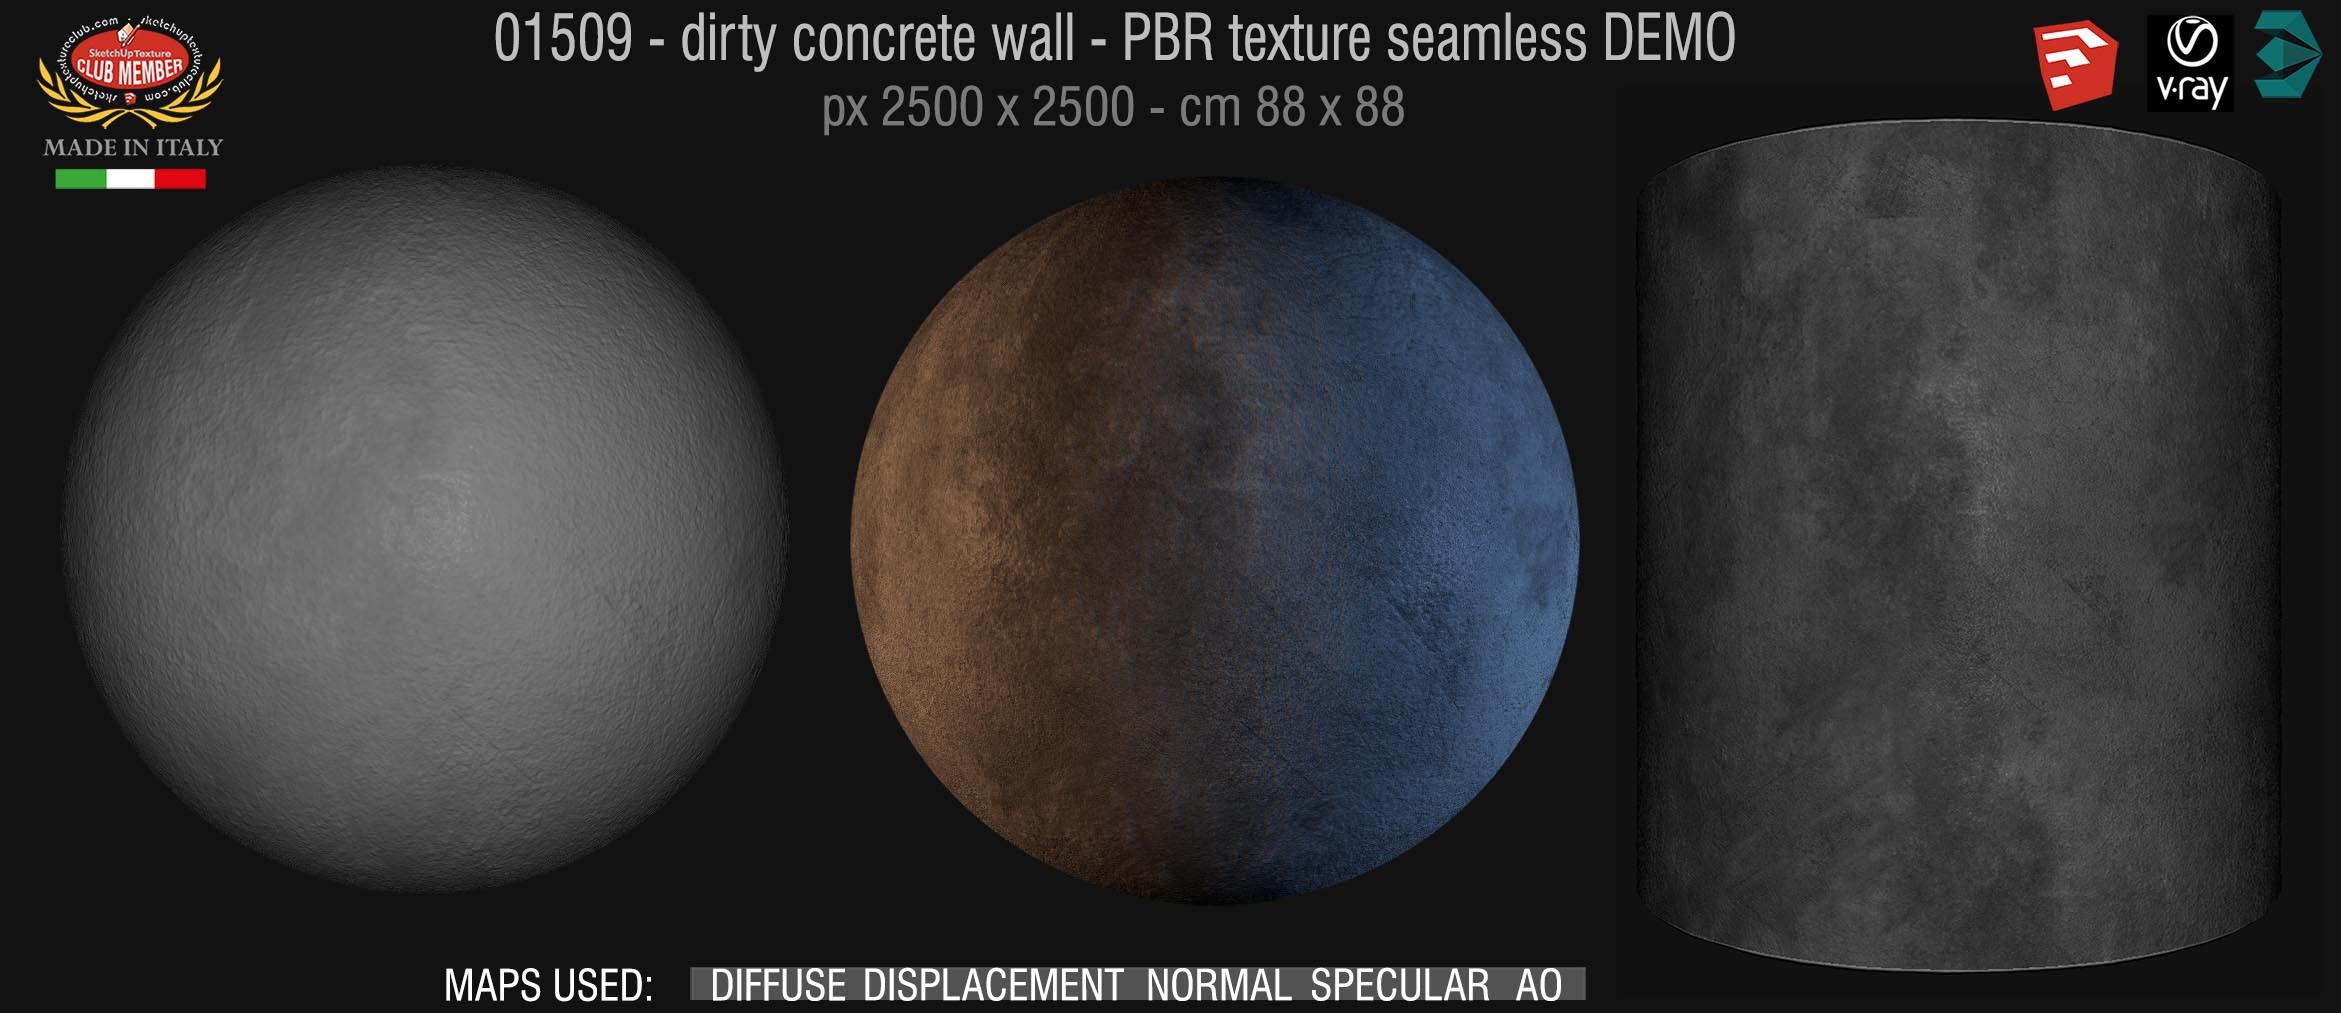 01509 Concrete bare dirty wall PBR texture seamless DEMO